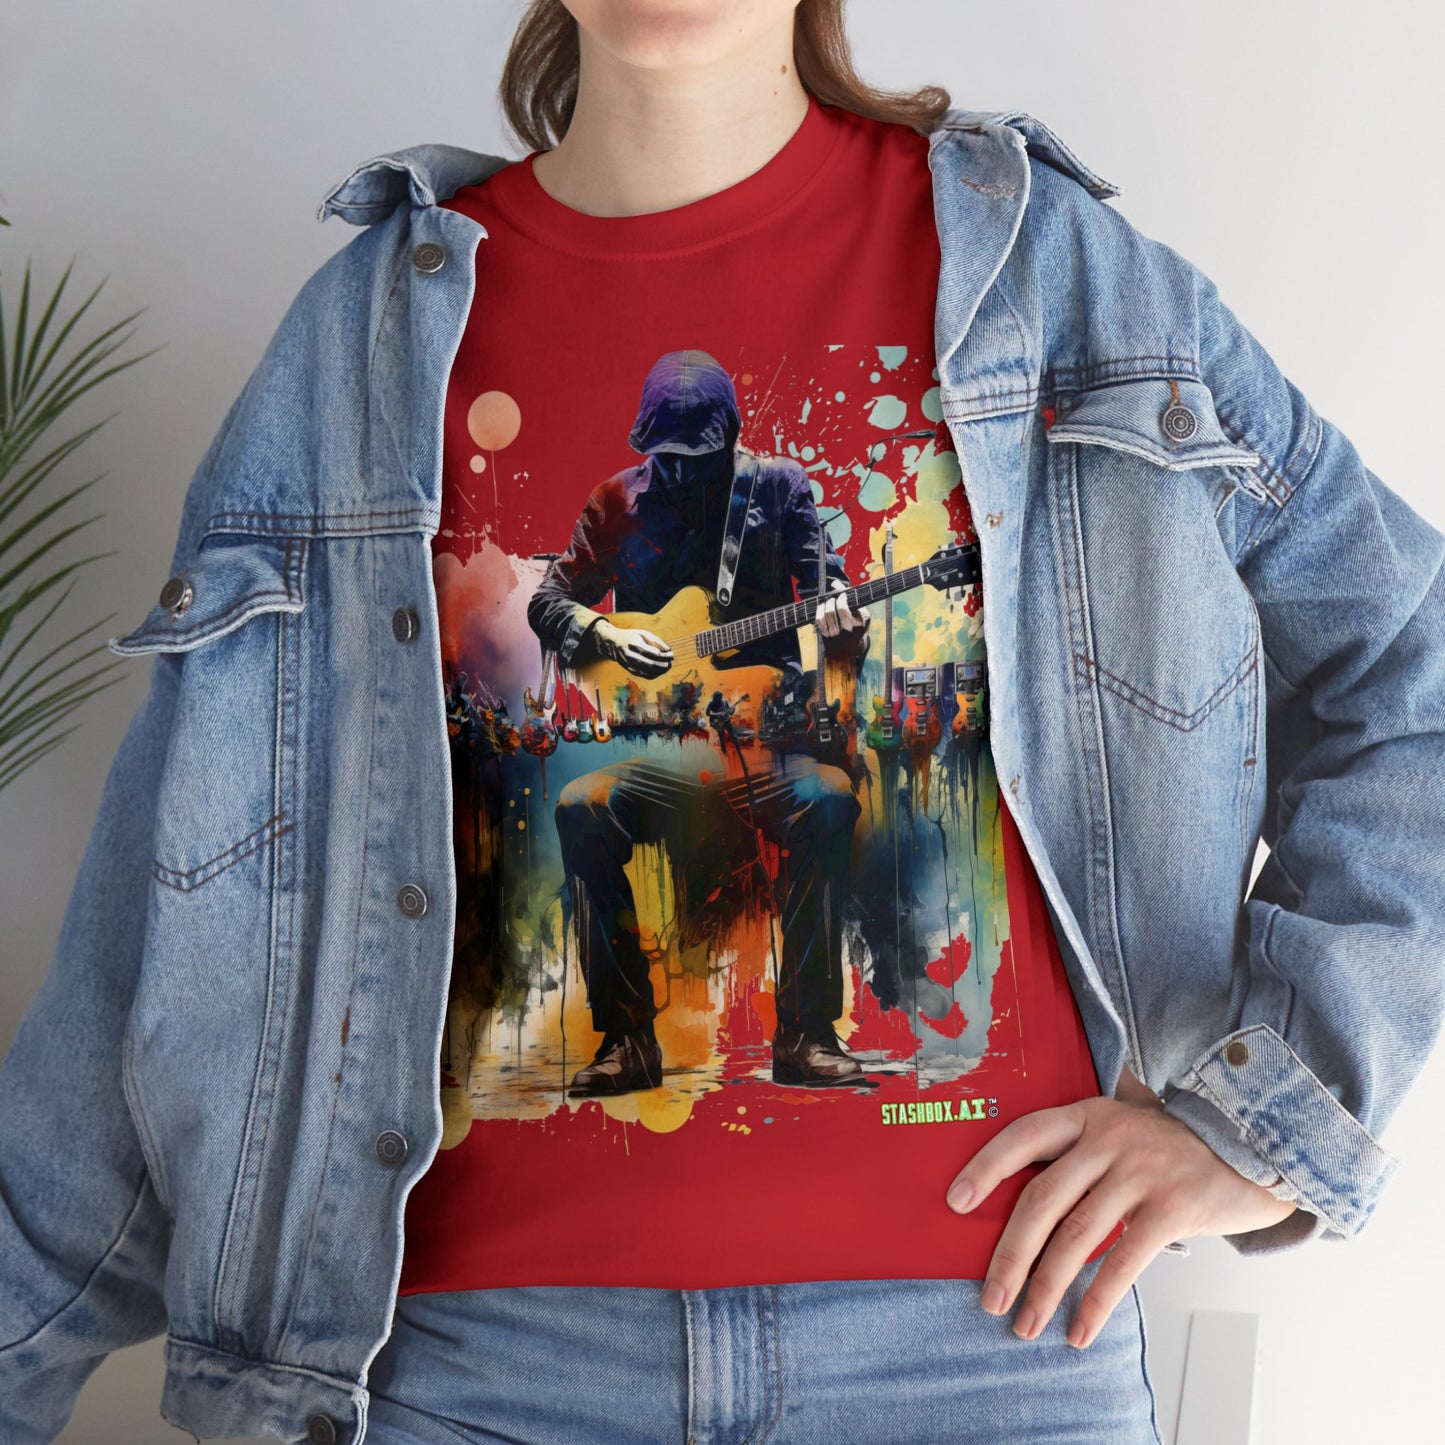 Unisex Adult Size Heavy Cotton Tshirt Colorful Guitarist and Guitars 007